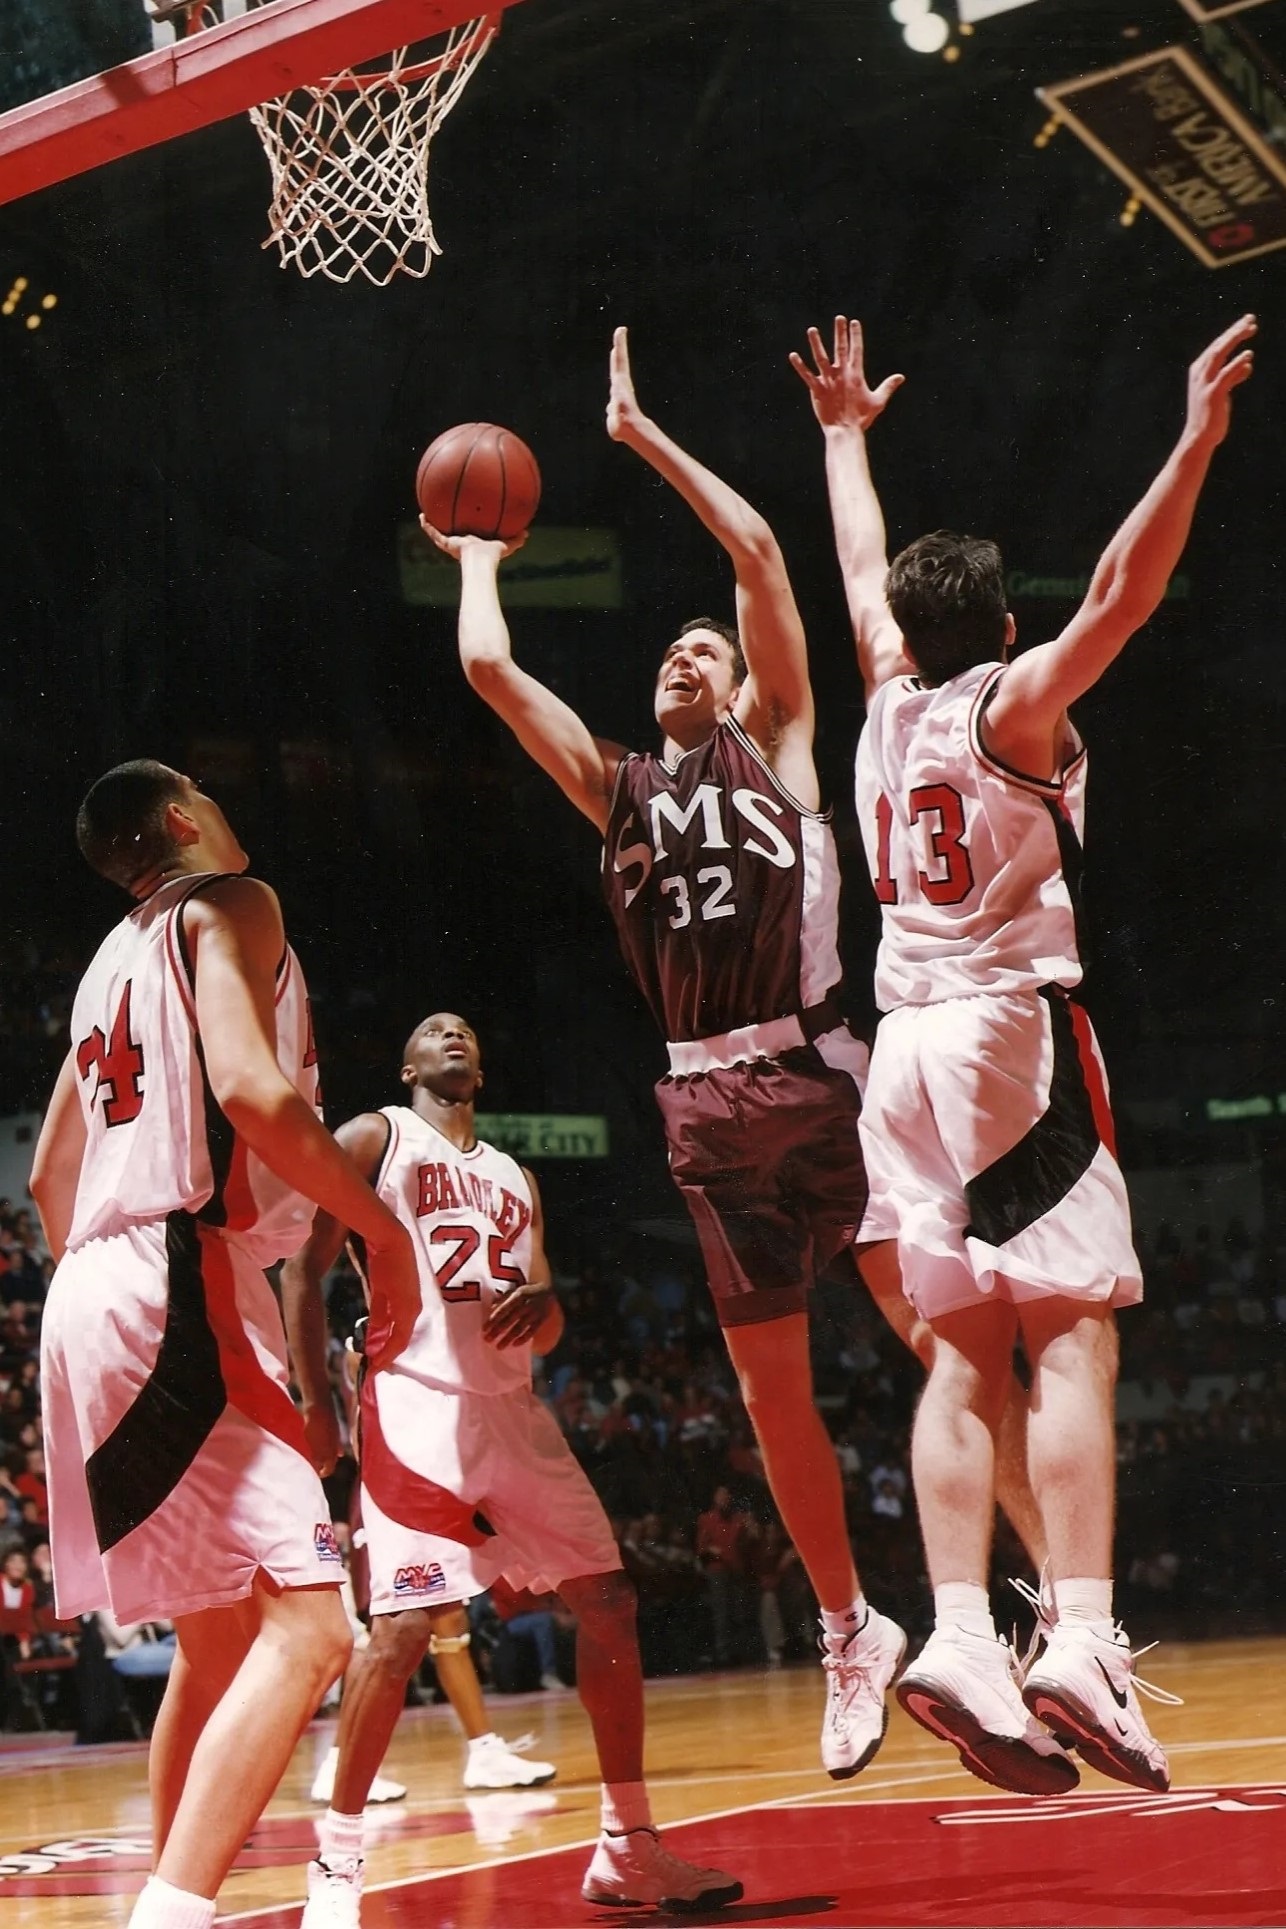 Danny Moore shoots the ball during a mid-1990s game at Bradley University.